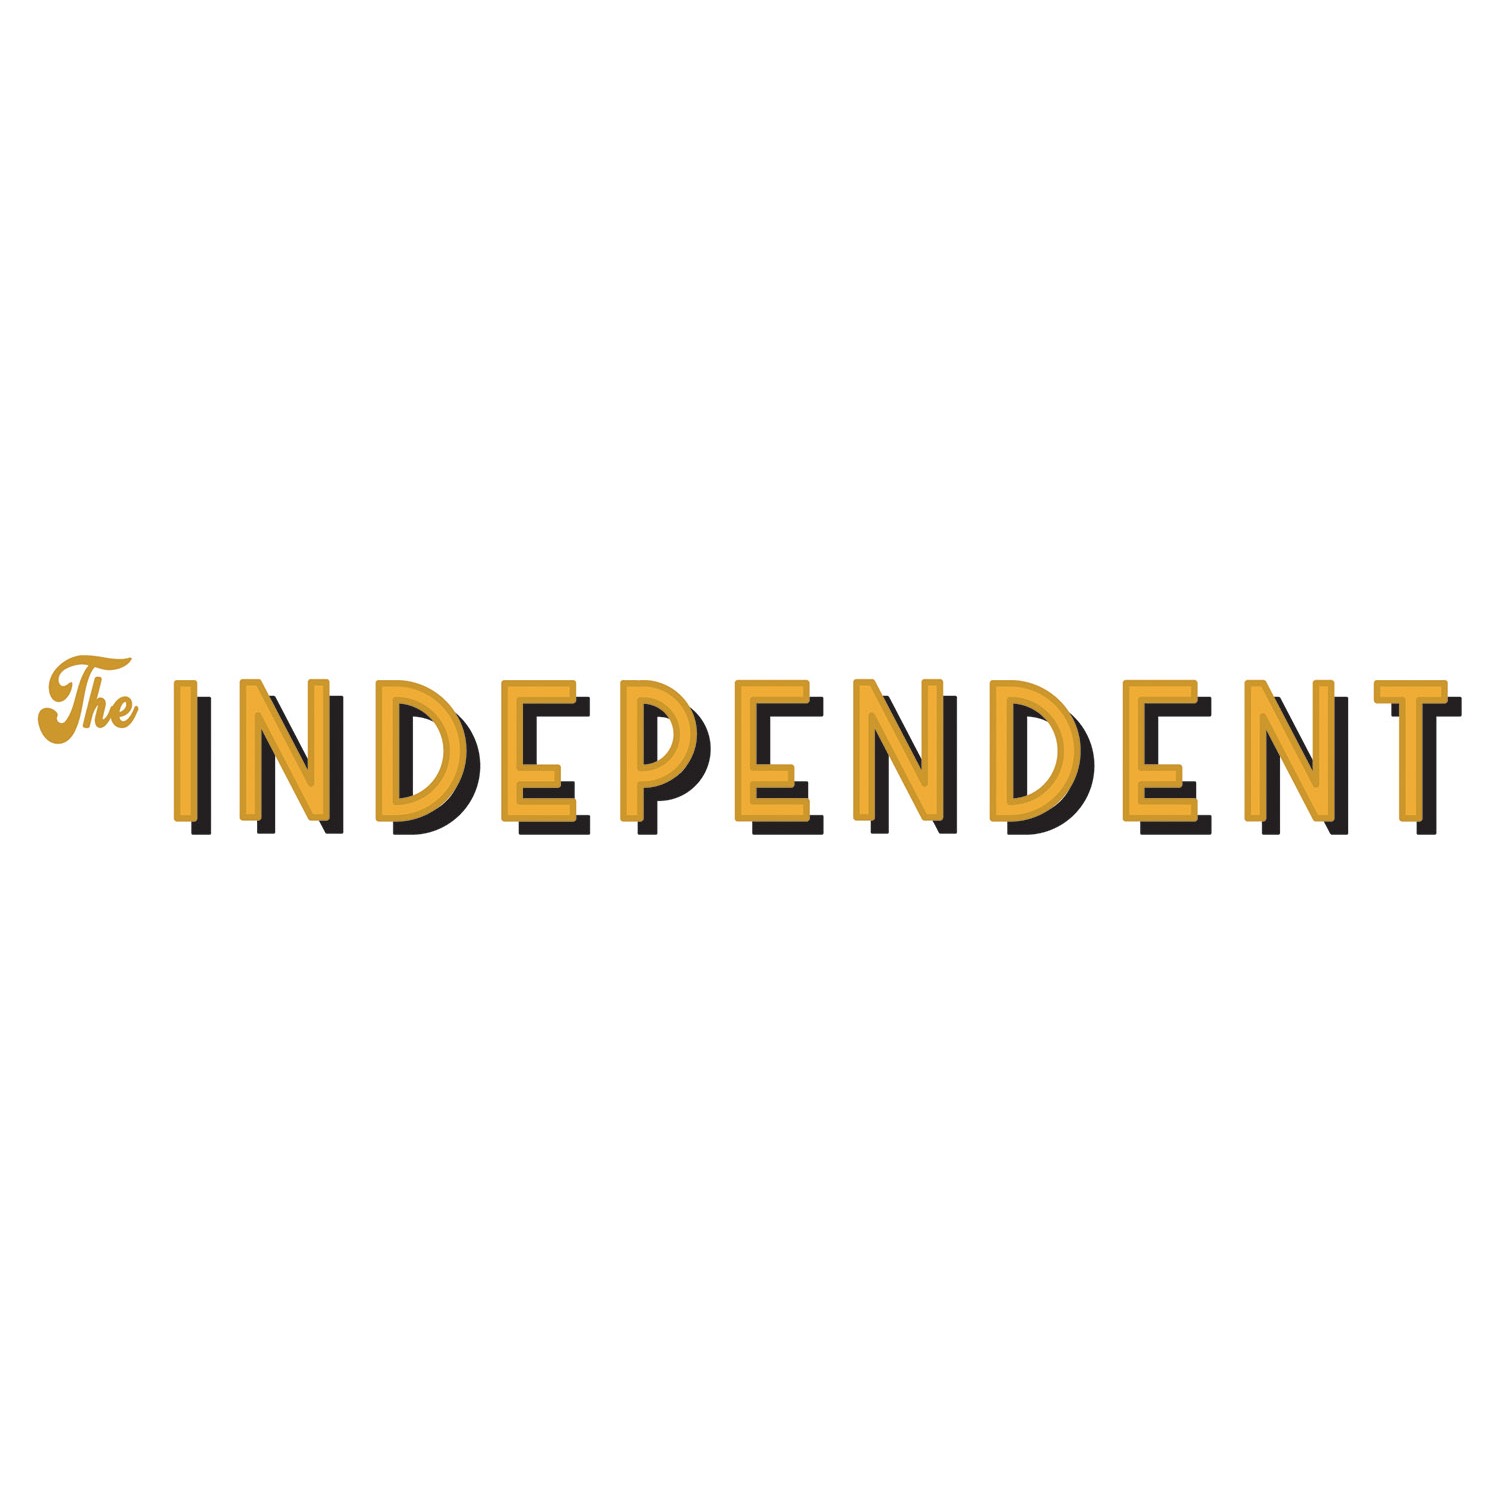 The Independent - New York, NY 10018 - (917)388-3727 | ShowMeLocal.com